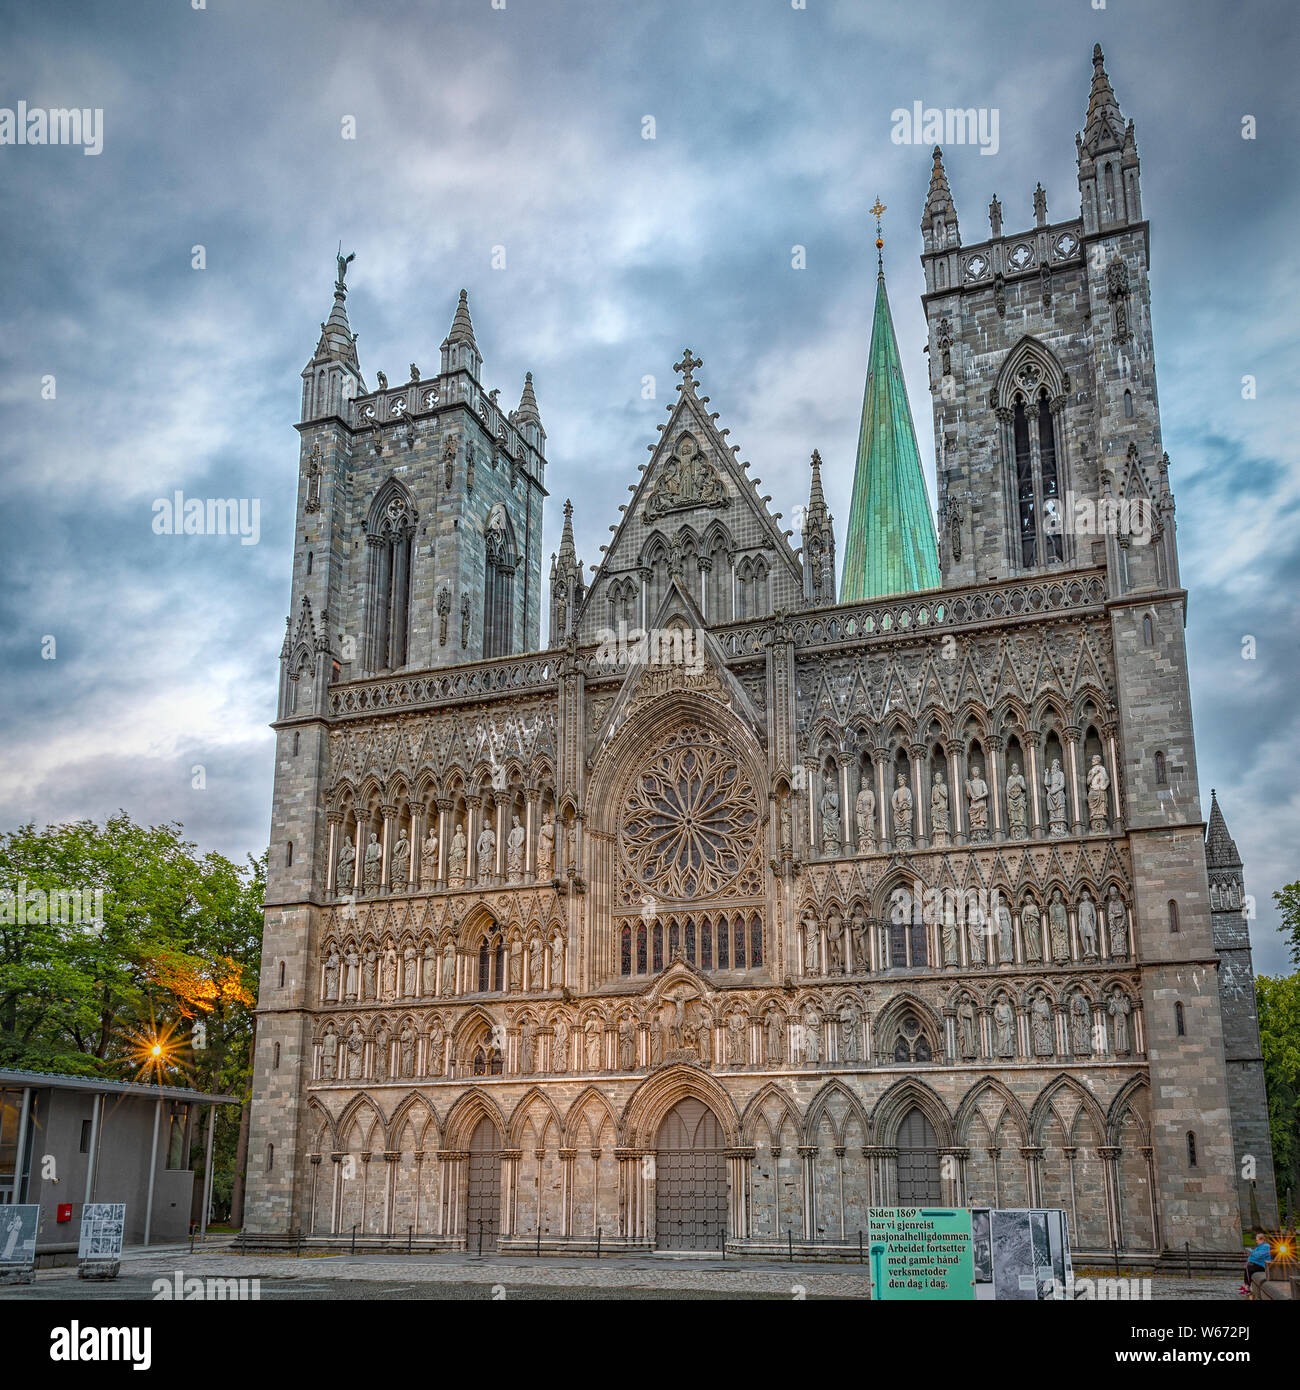 TRONDHEIM, NORWAY - JULY 15, 2019: Nidaros Cathedral of the Church of Norway located in the city of Trondheim in Trondelag county. Stock Photo